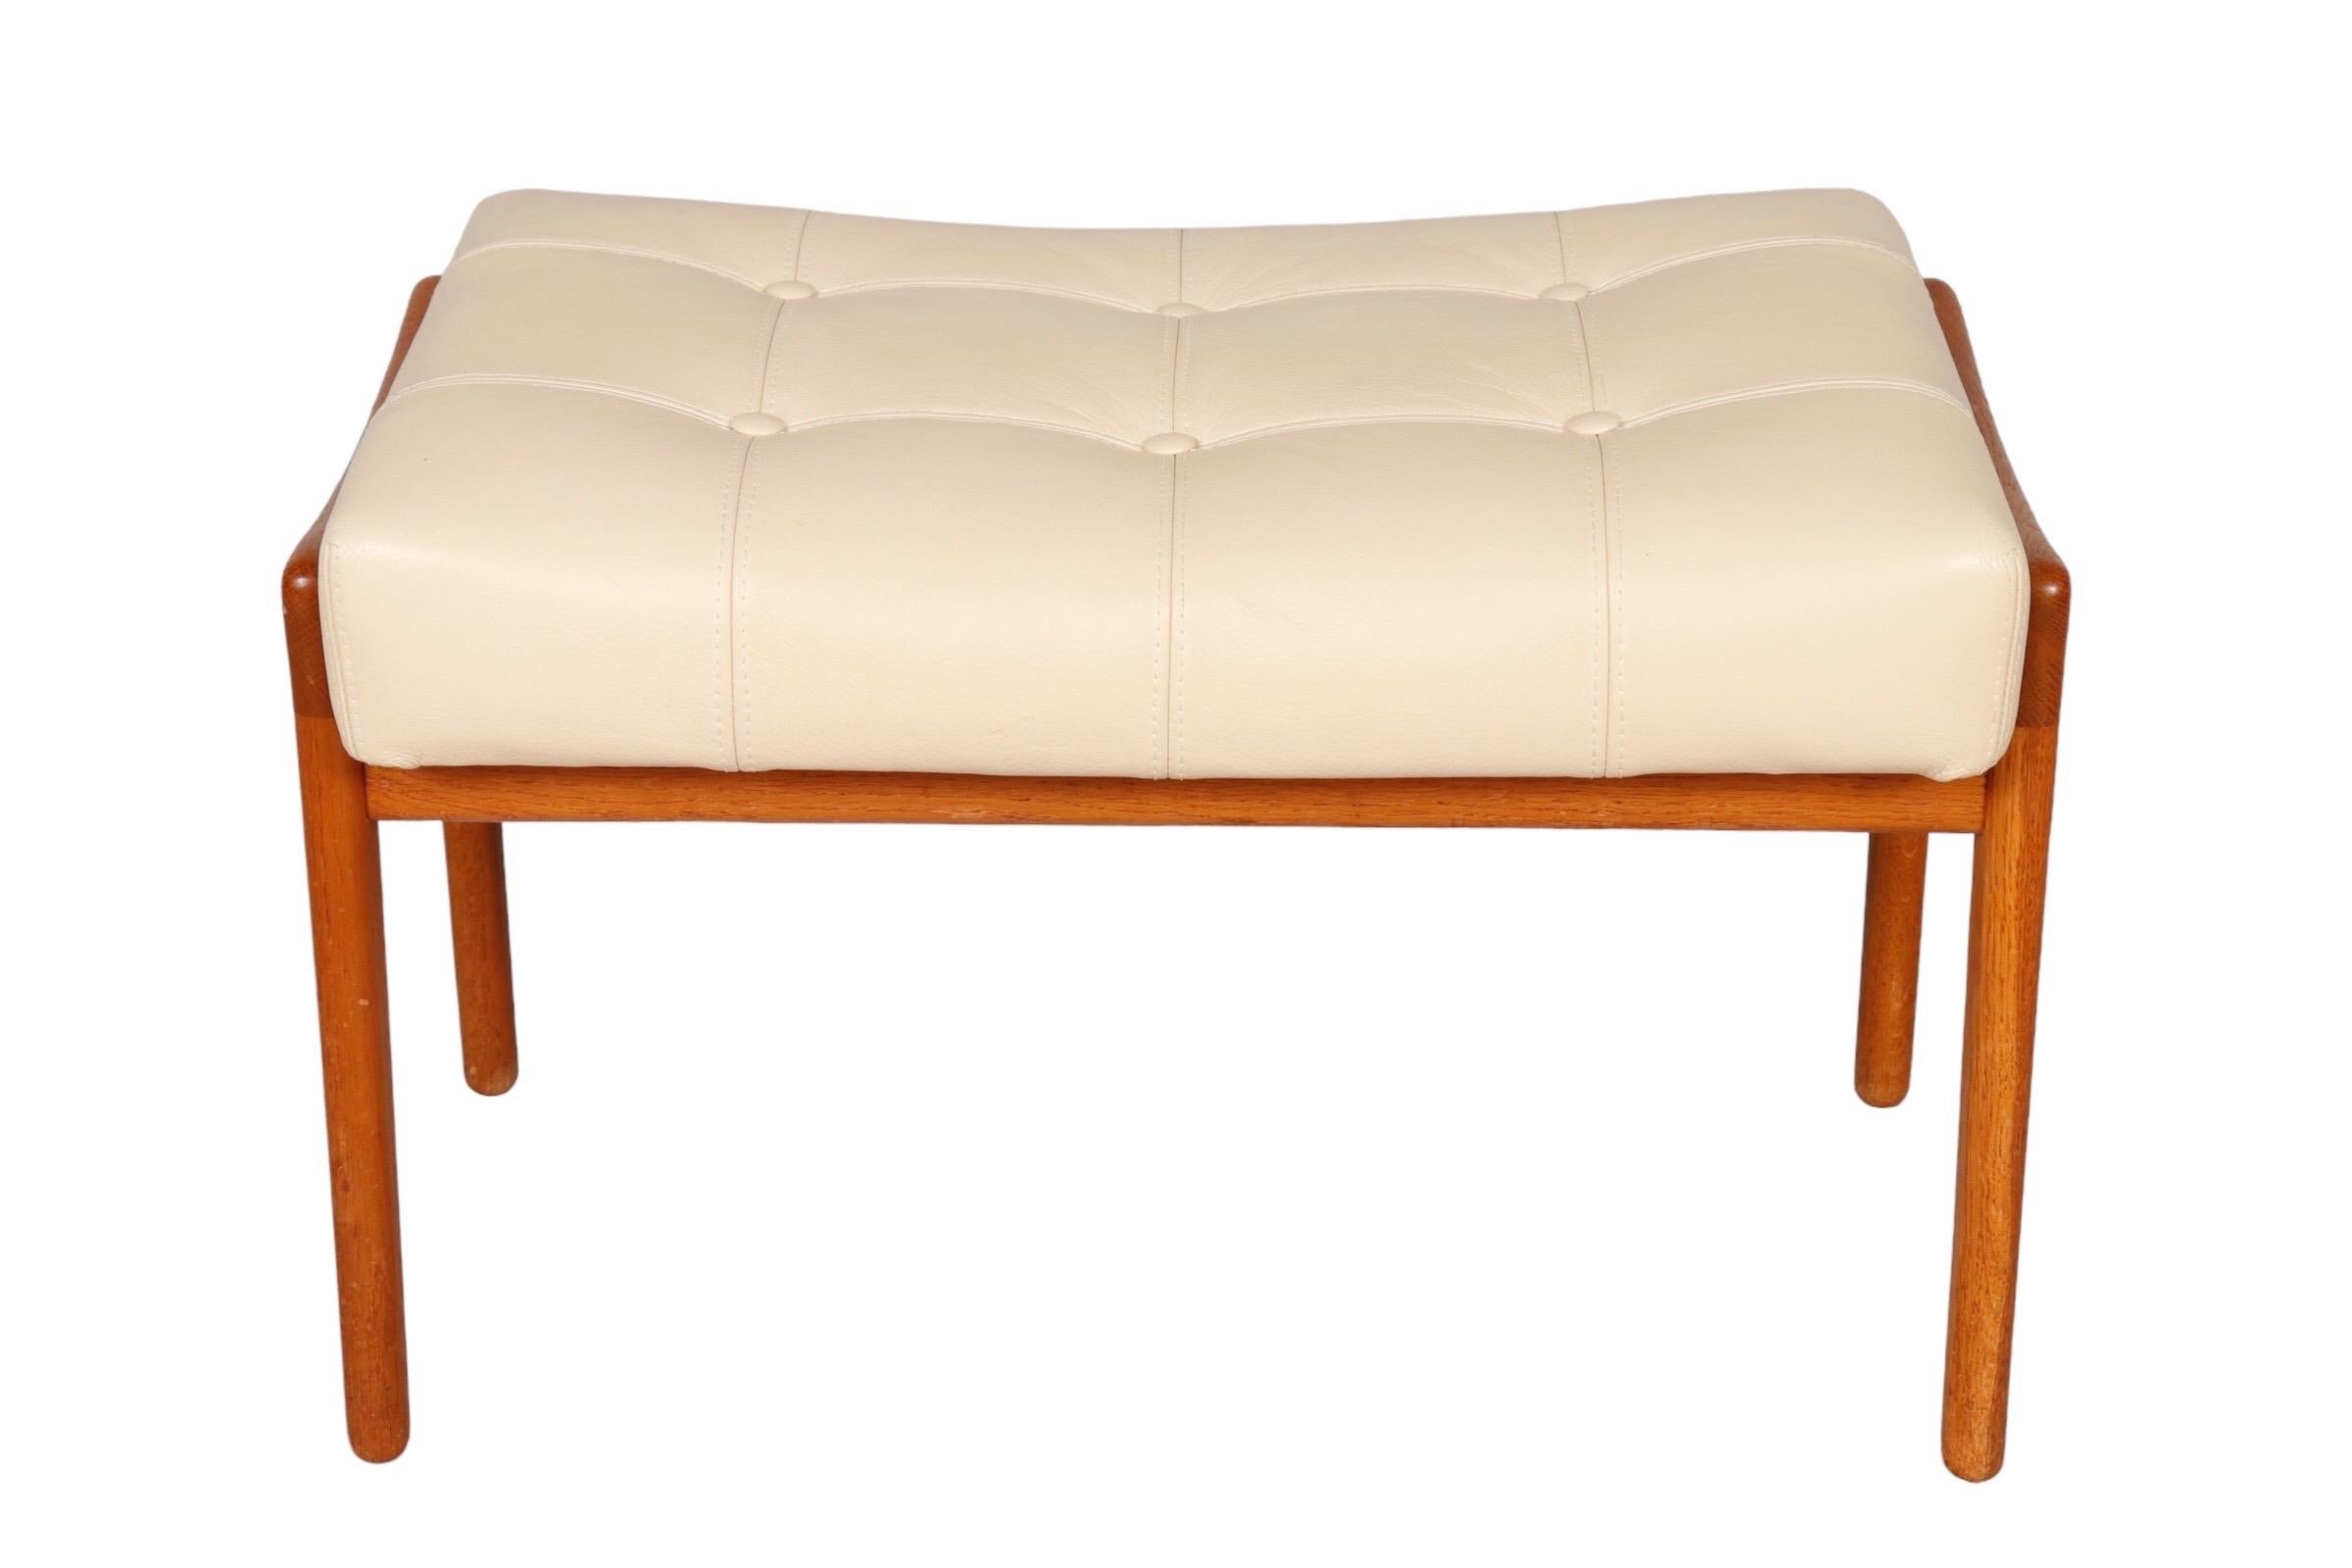 A Swiss Mid-Century Modern ottoman. The frame is made of teak and the seat is upholstered in white faux leather with square button tufting. Marked underneath Arteflo Sa, Arredamenti Interni, Lugano.